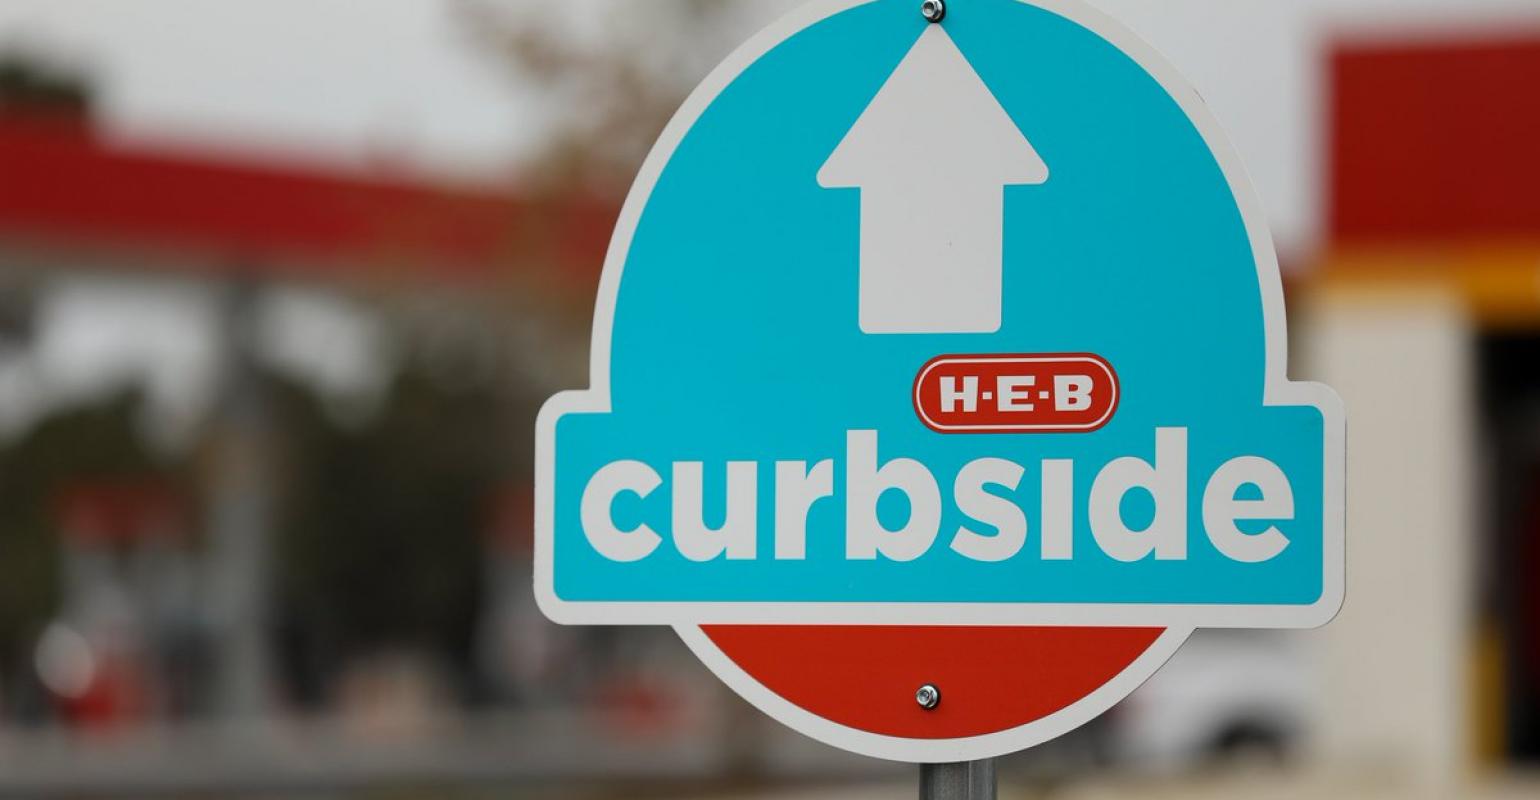 H-E-B, Whole Foods lead in curbside pickup times ...